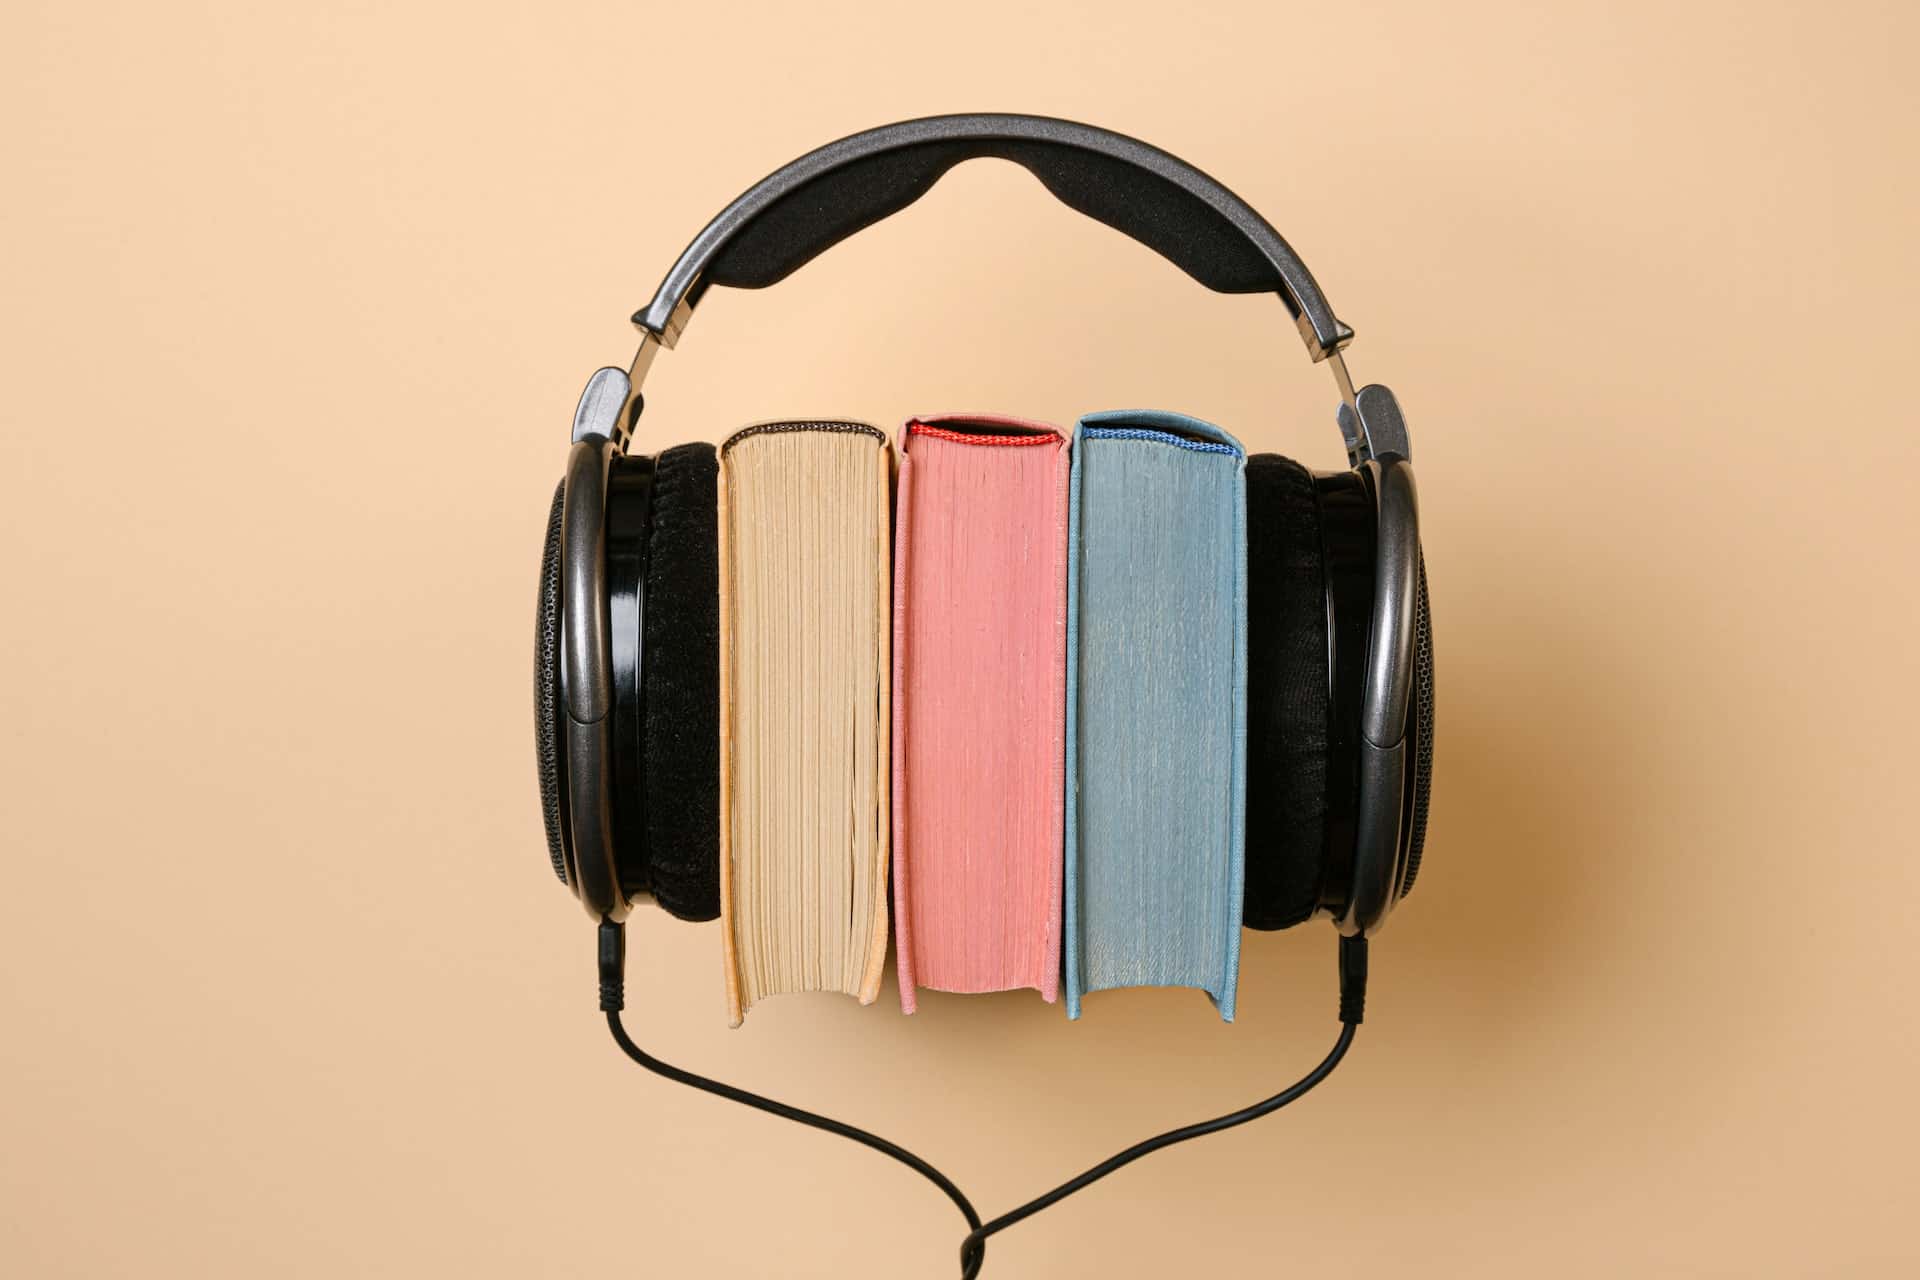 10 best things to do while listening to an audiobook